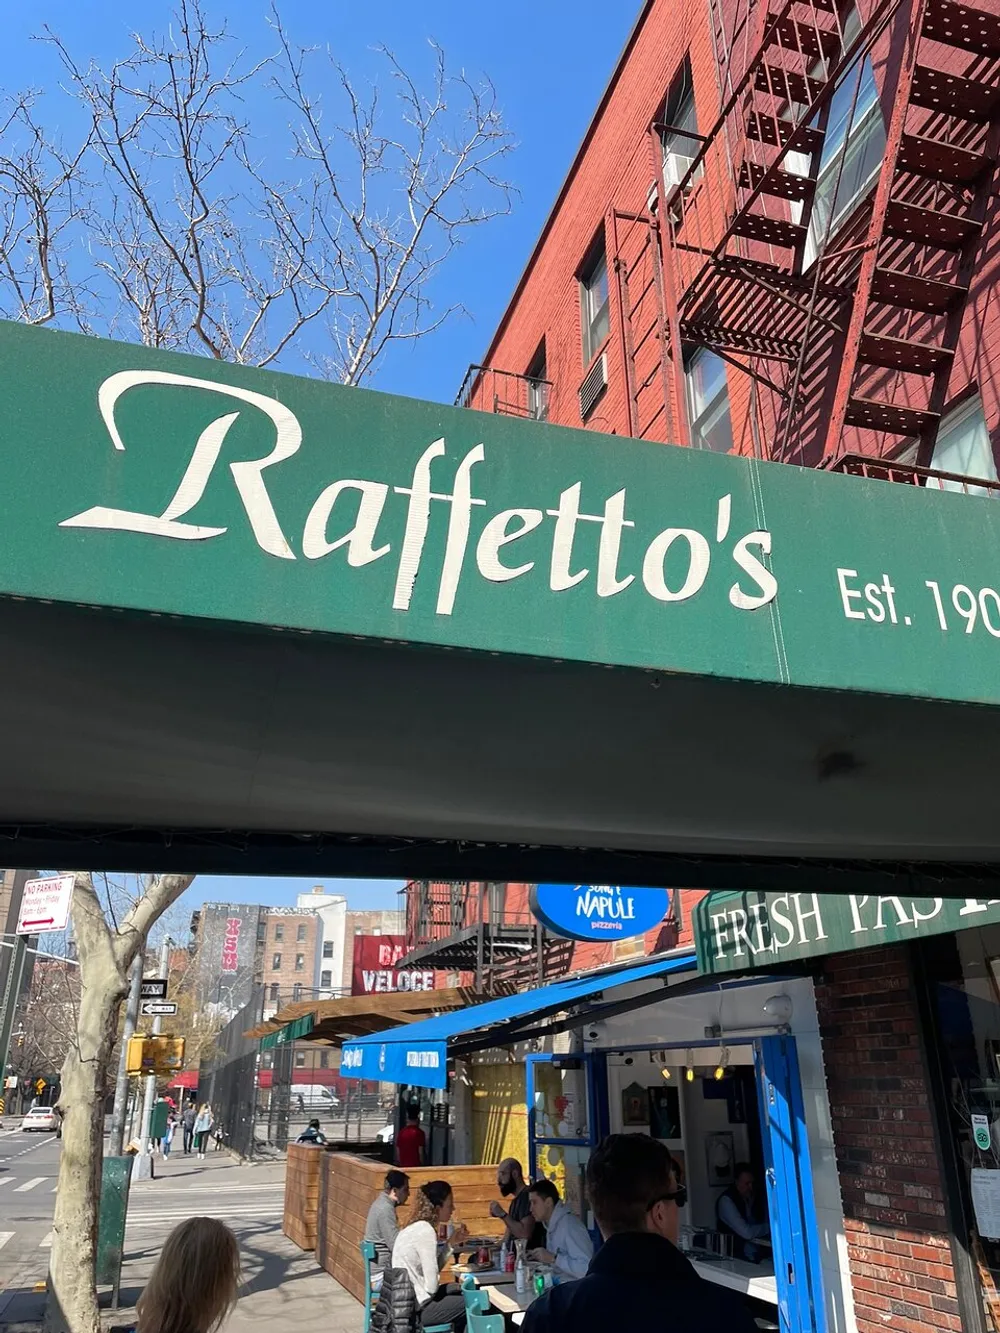 The image displays the storefront of Raffettos established in 1906 with people dining at an outdoor seating area under a clear blue sky